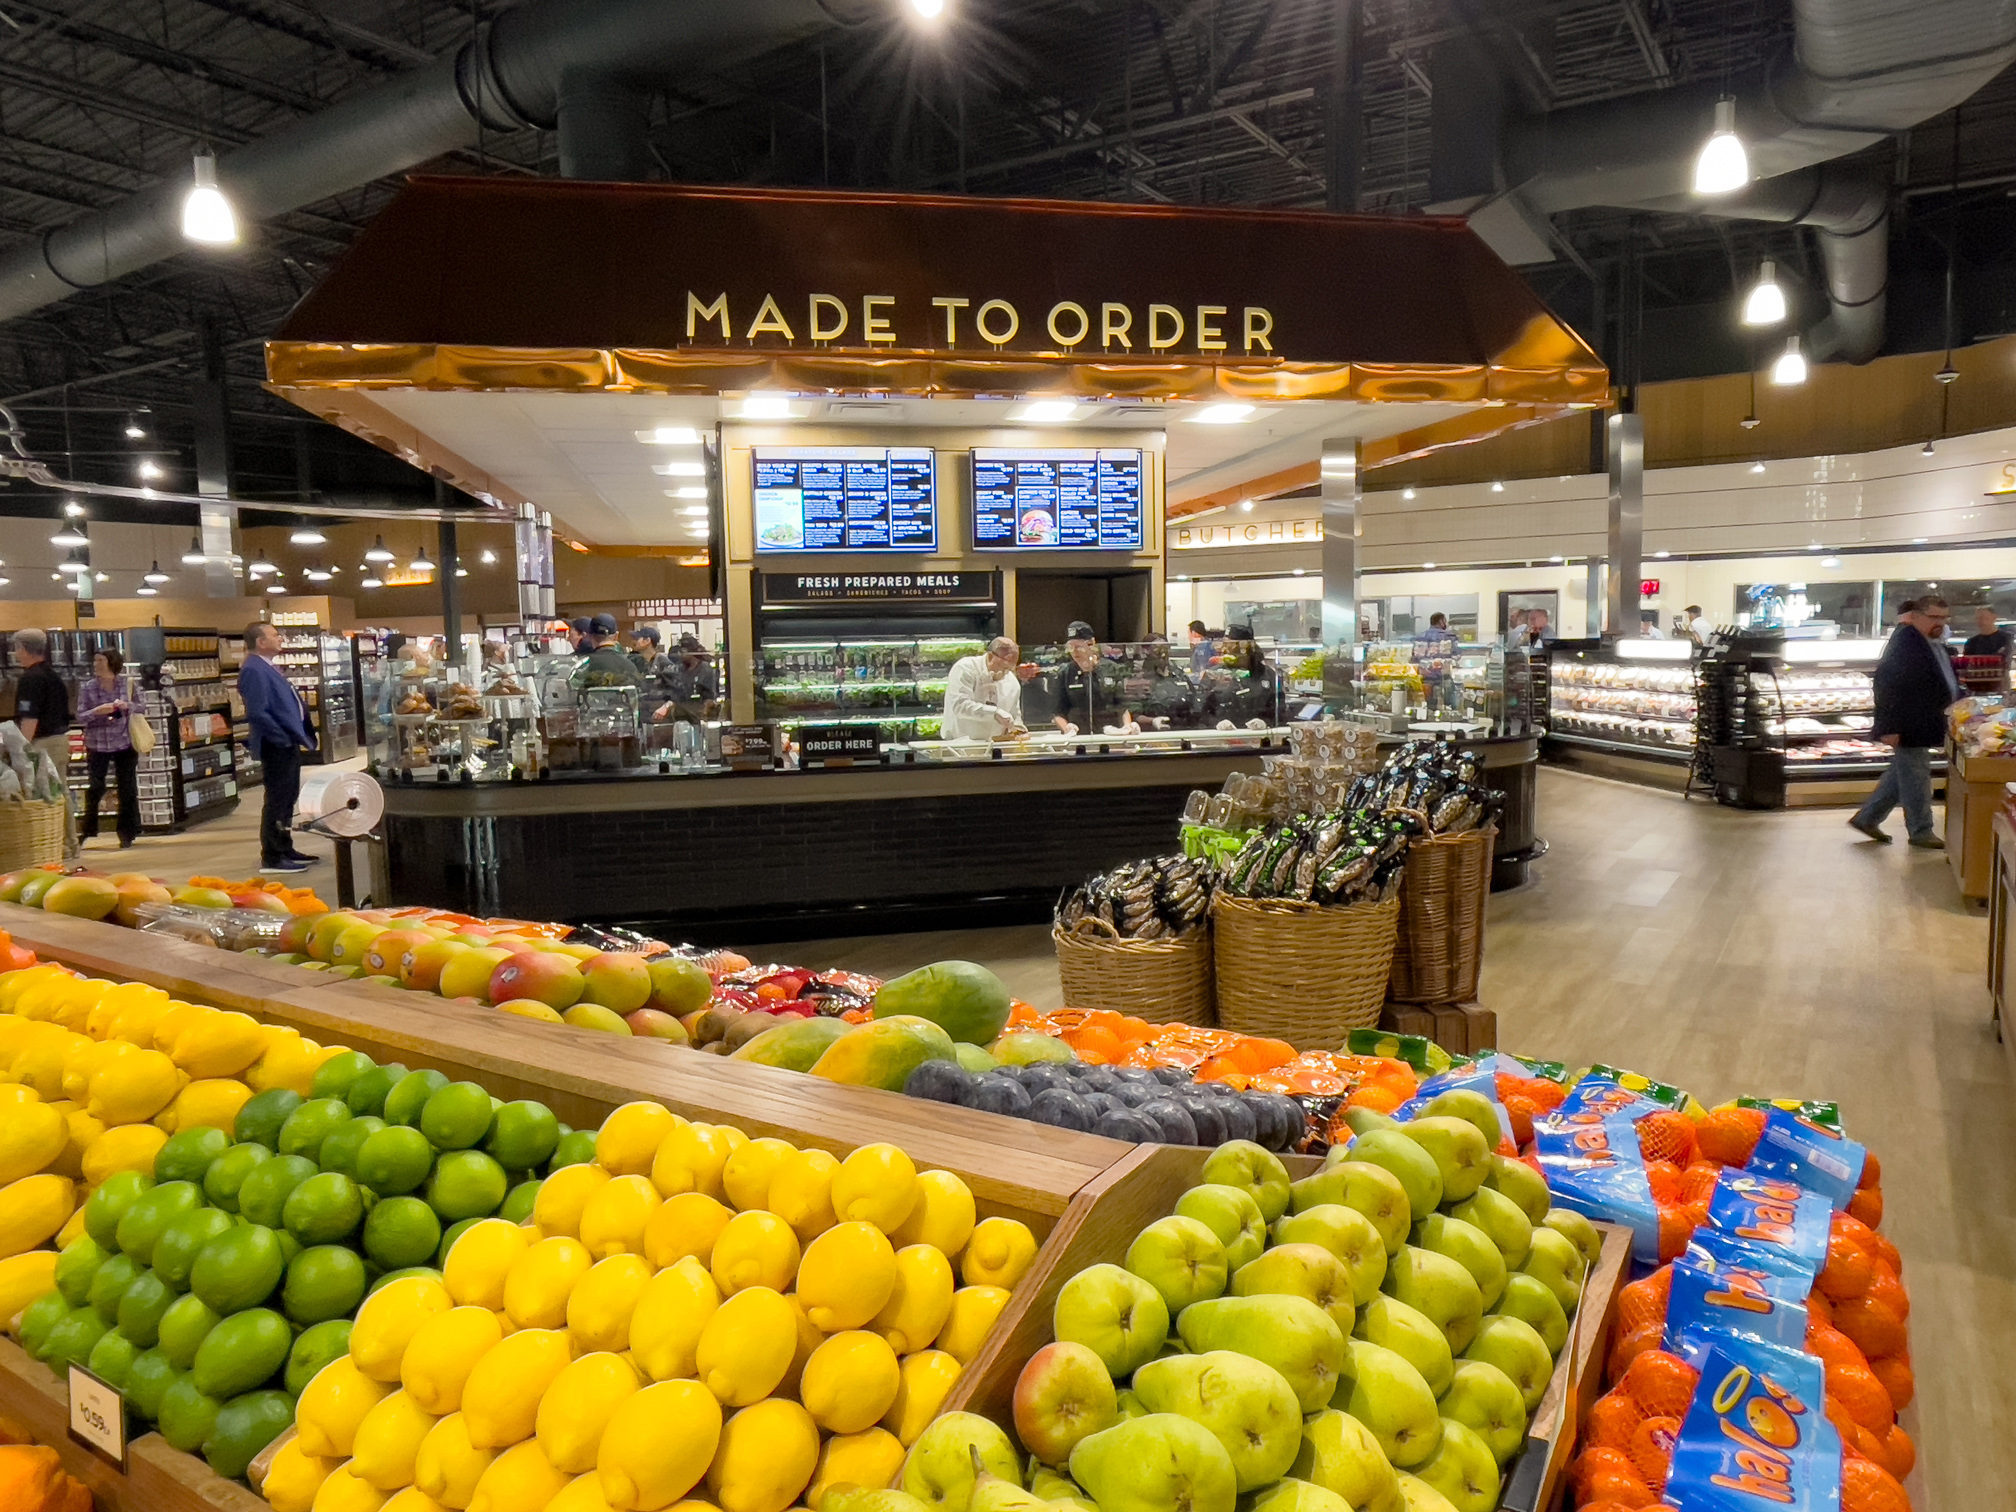 The Fresh Market’s 160th store now open in Palm Beach Gardens, Florida. Photo credit: The Fresh Market, Inc.